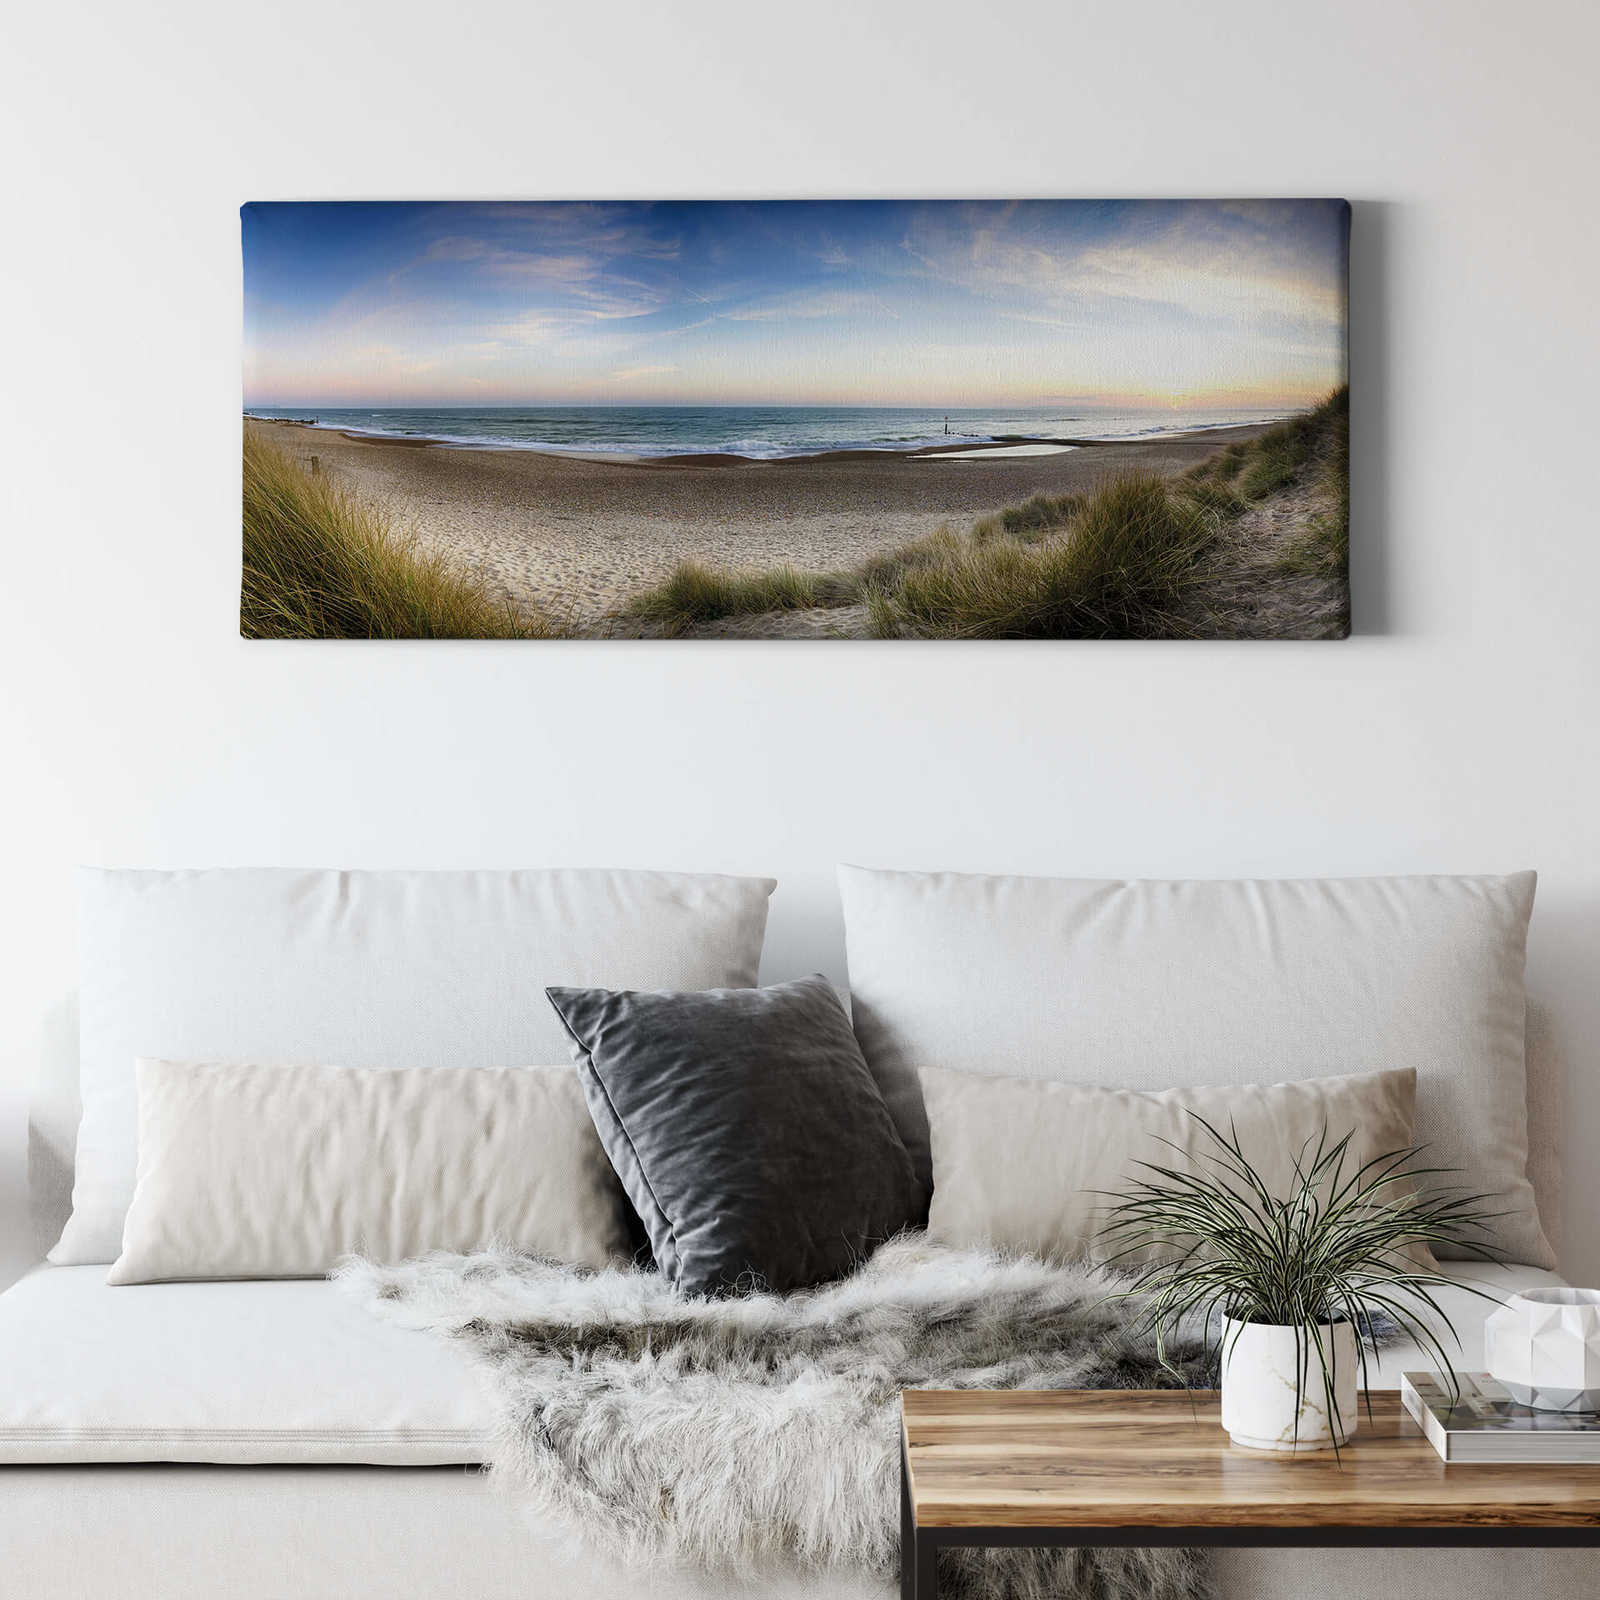             Beach panorama canvas print in blue and green
        